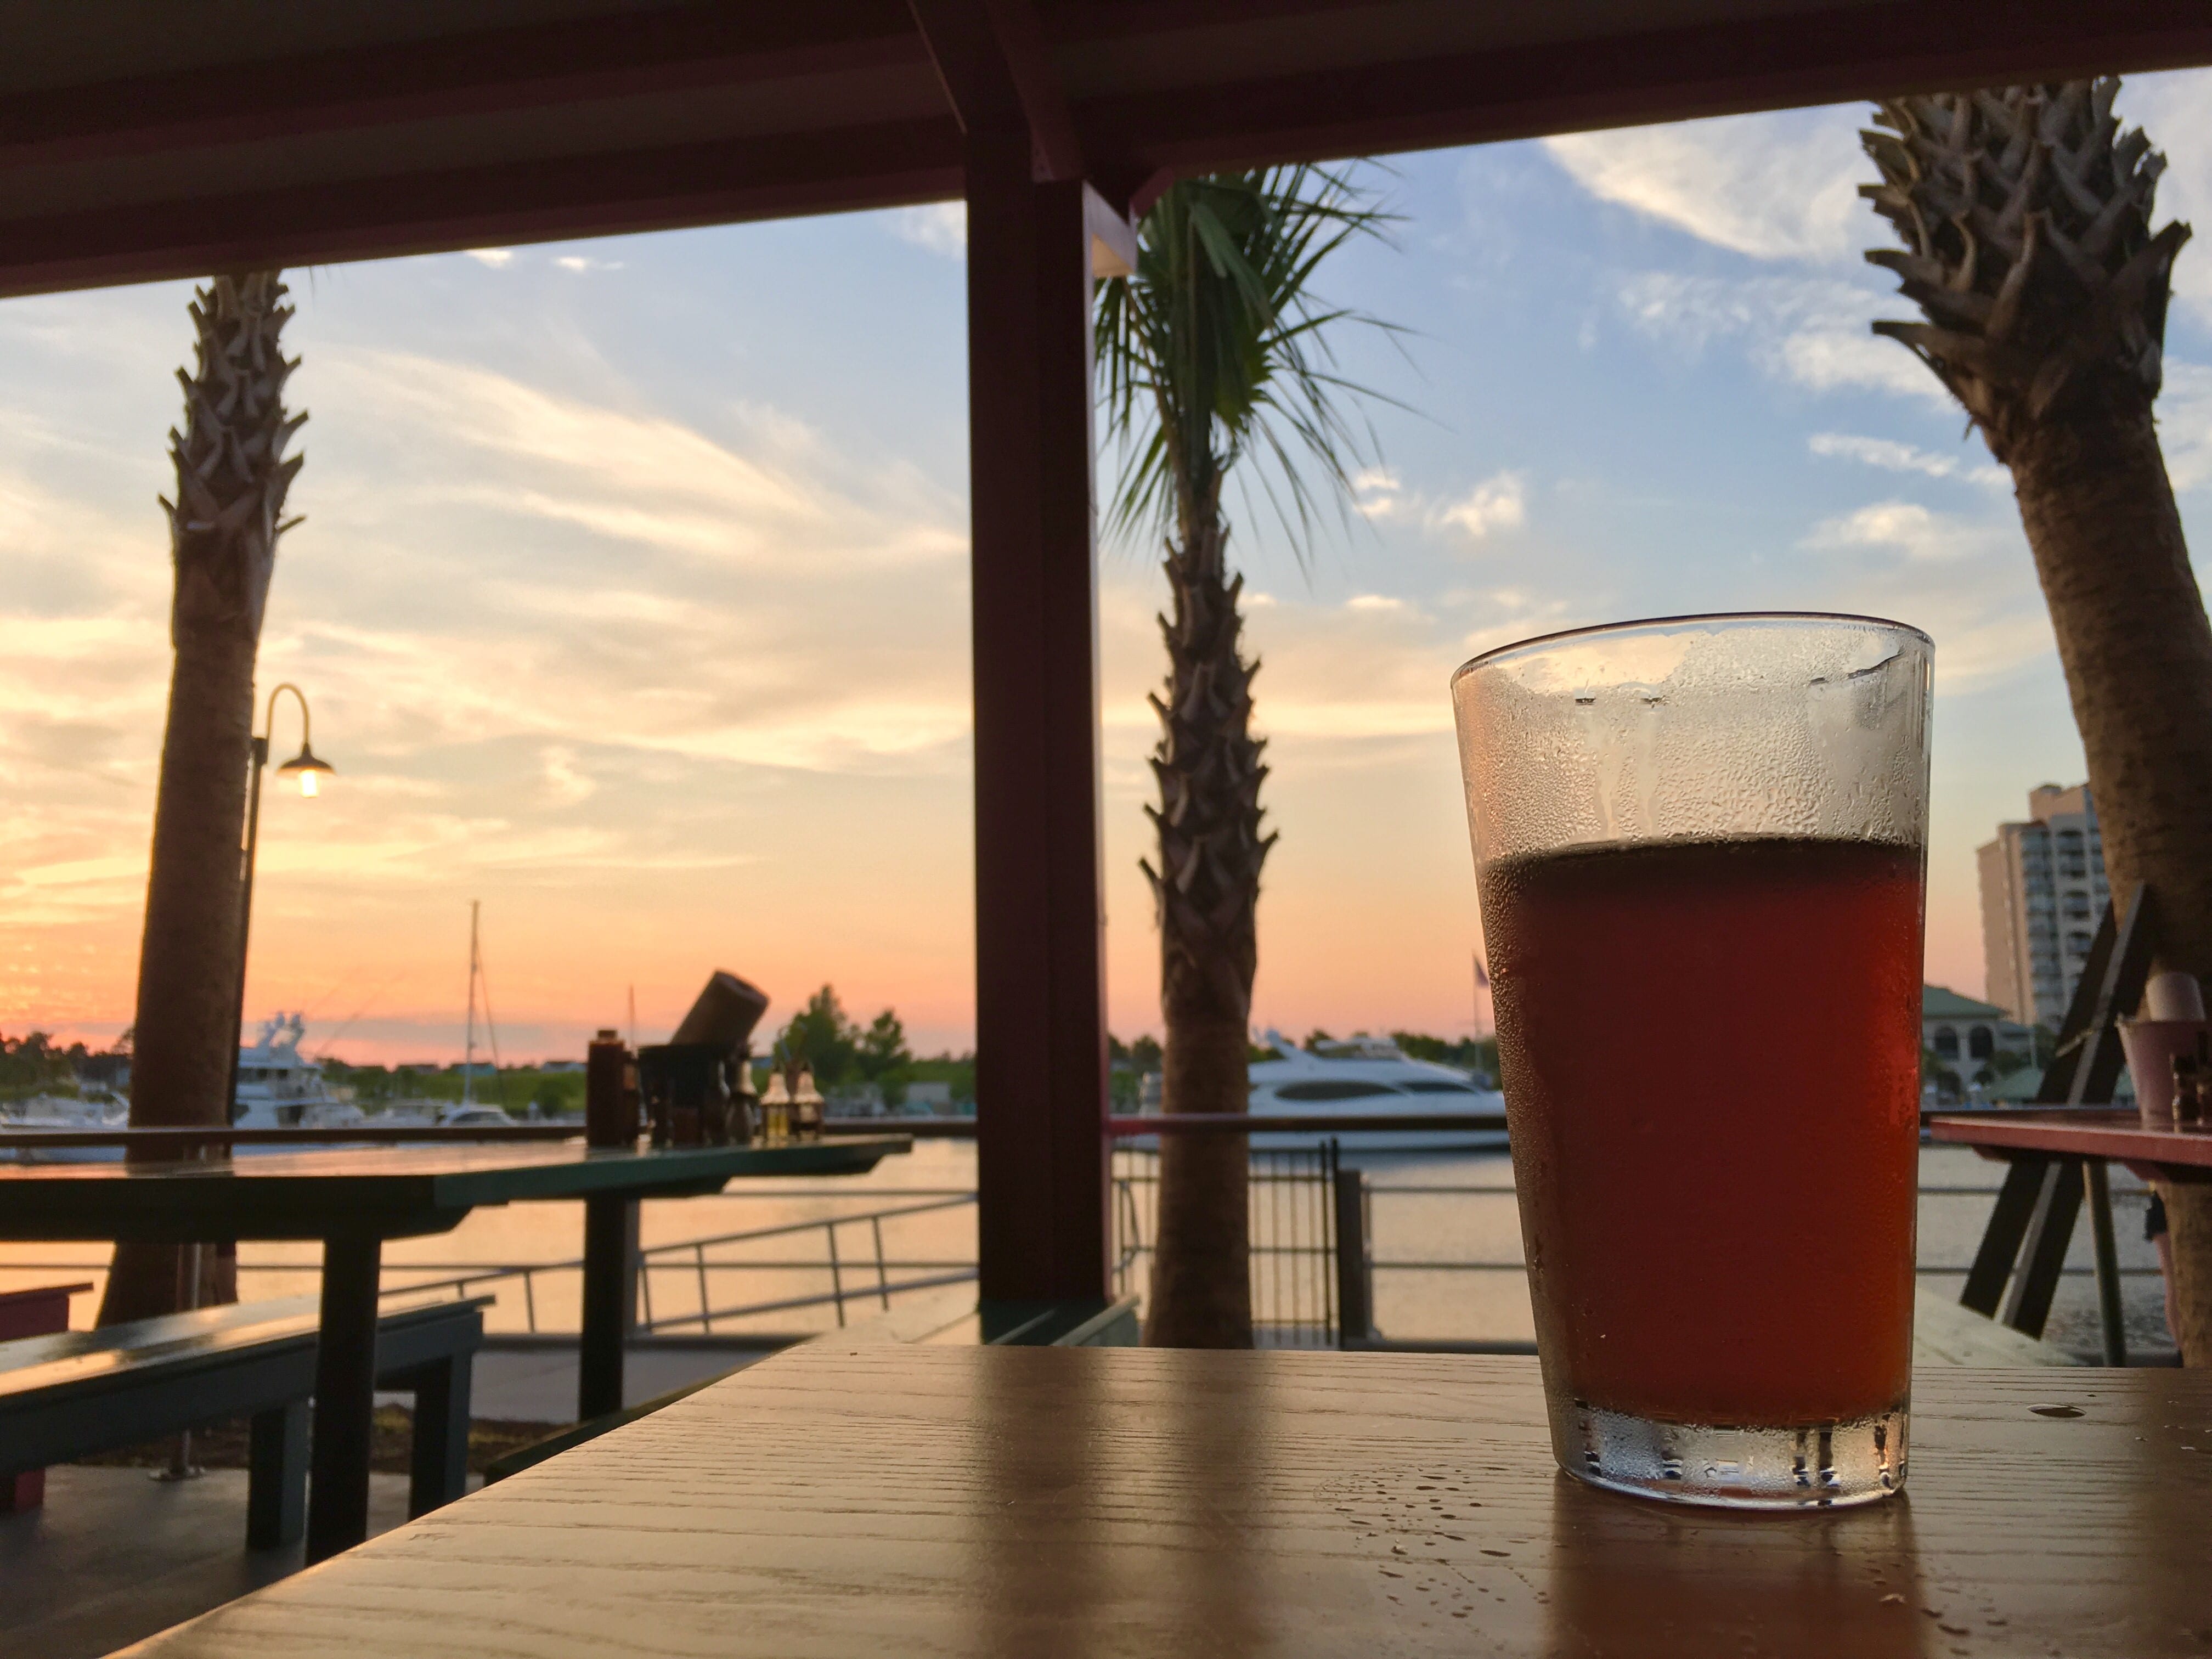 Myrtle Beach Attractions – Barefoot Landing image thumbnail